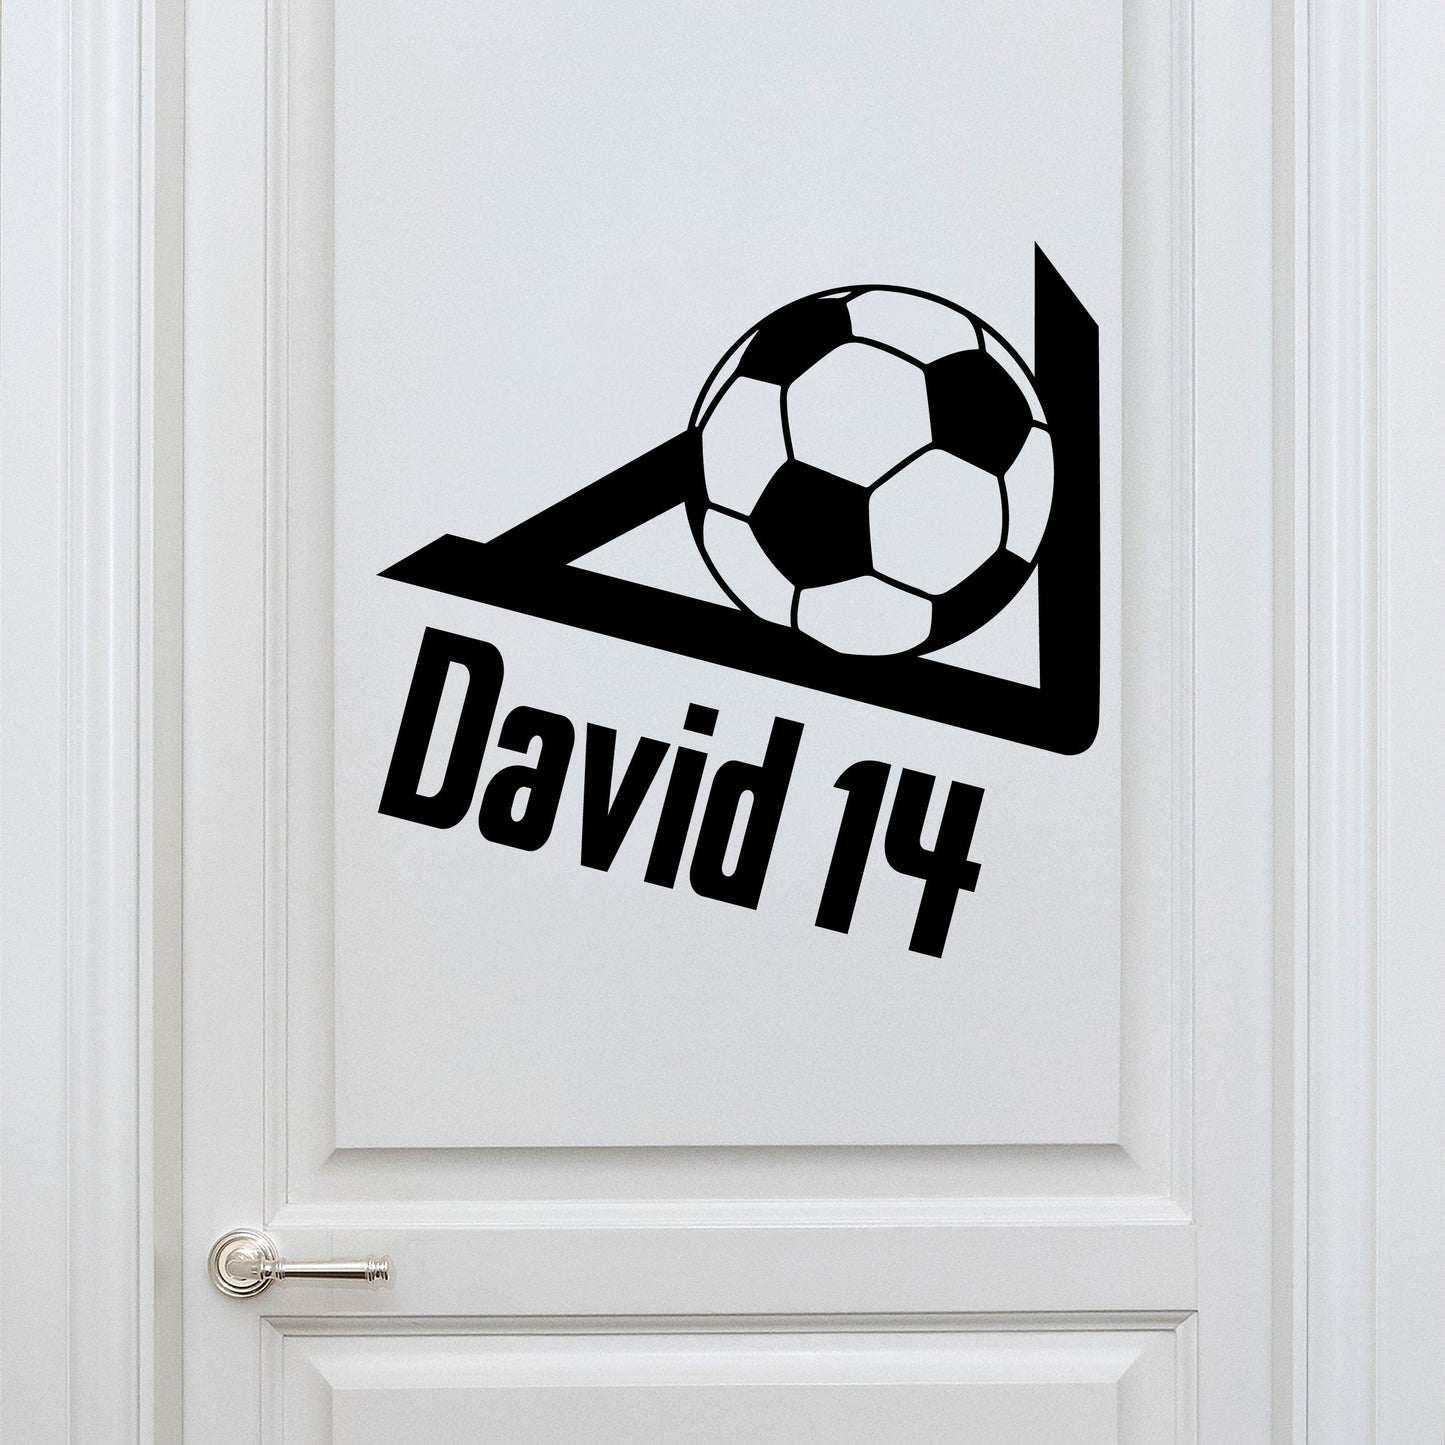 Soccer Wall Decal - Personalized Custom Soccer Player Wall Decal - Choose Your Name - Personalized Soccer Wall Decal - Wall Soccer Decal